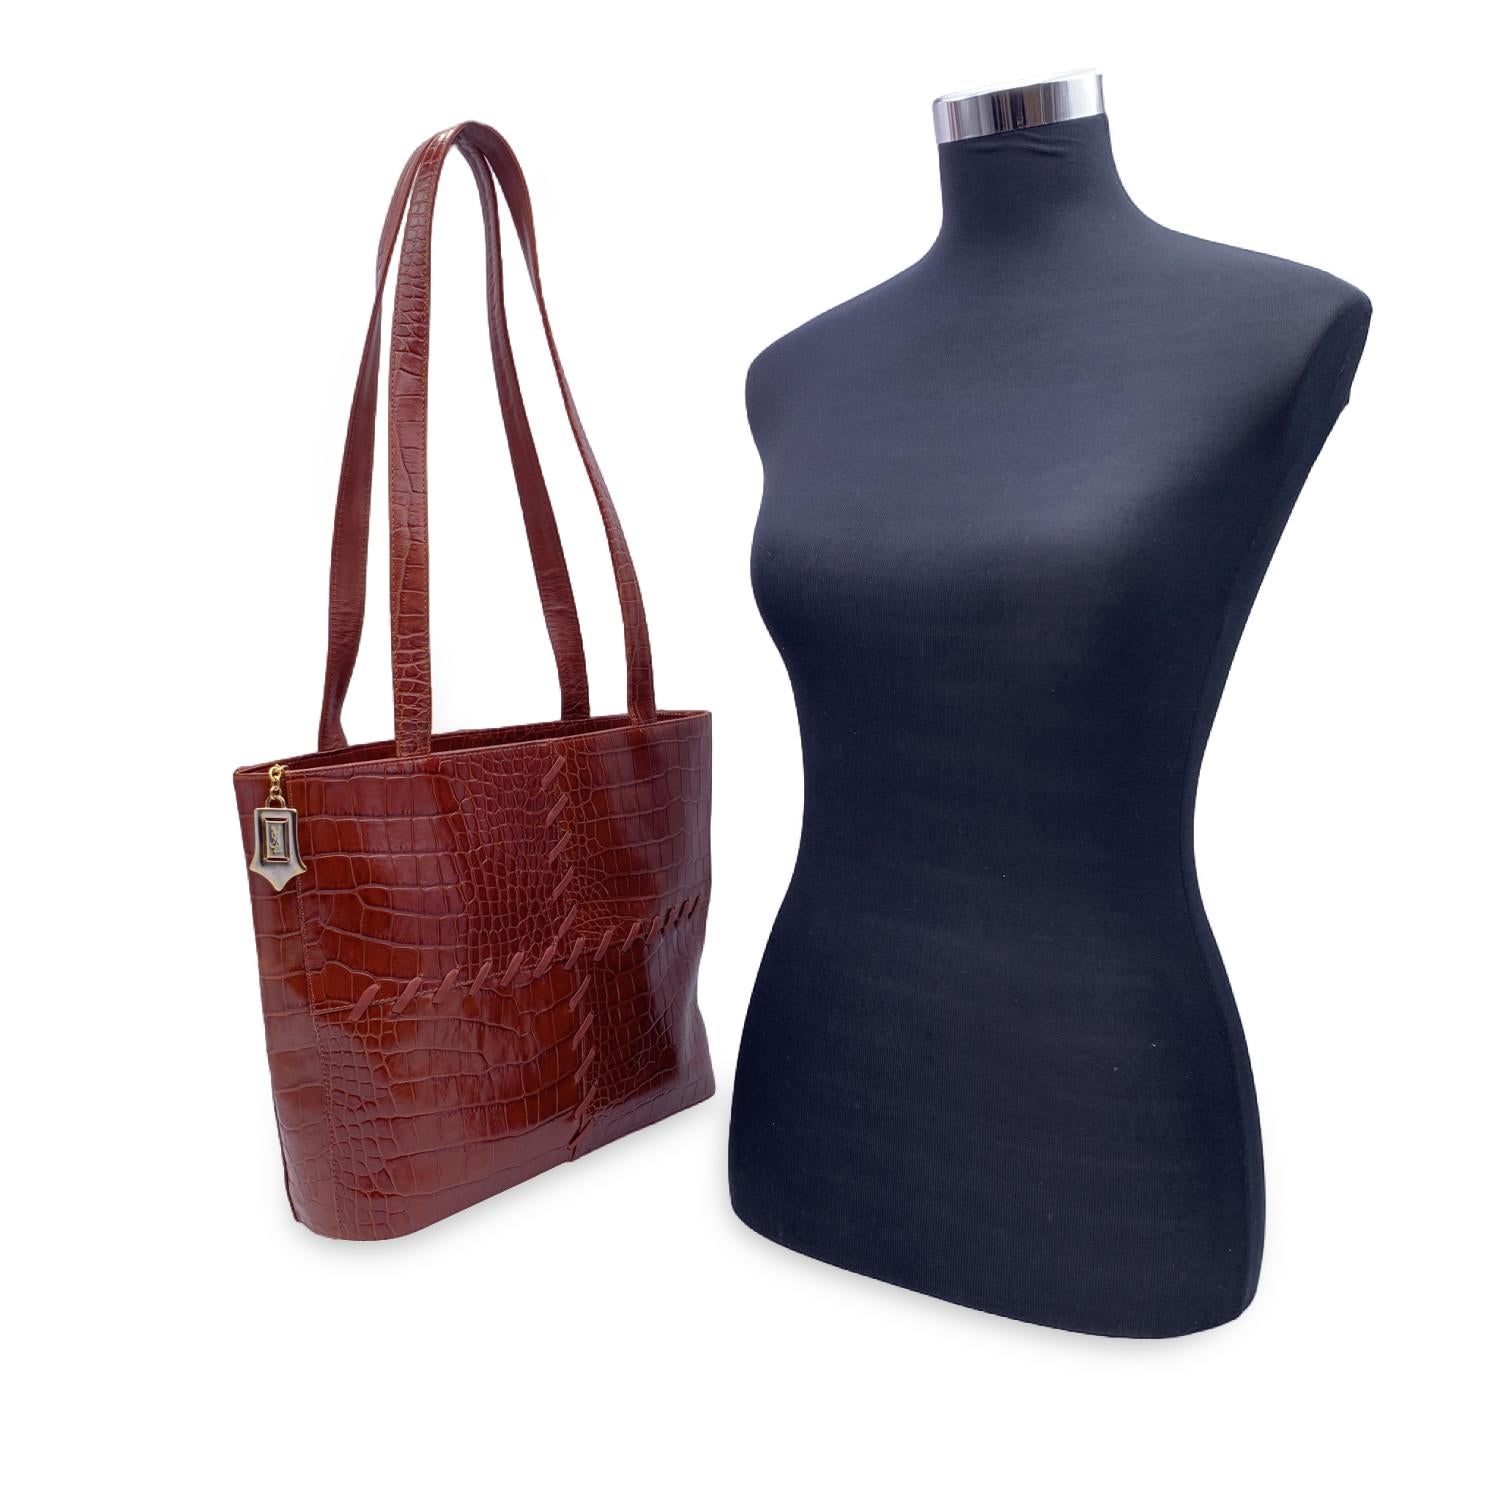 Vintage YVES SAINT LAURENT brown embossed leather tote bag. Brown whipstitch detailing Open top with middle zip section. Brown fabric lining. 'Yves Saint Laurent' tag inside.

Details

MATERIAL: Leather

COLOR: Brown

MODEL: -

GENDER: